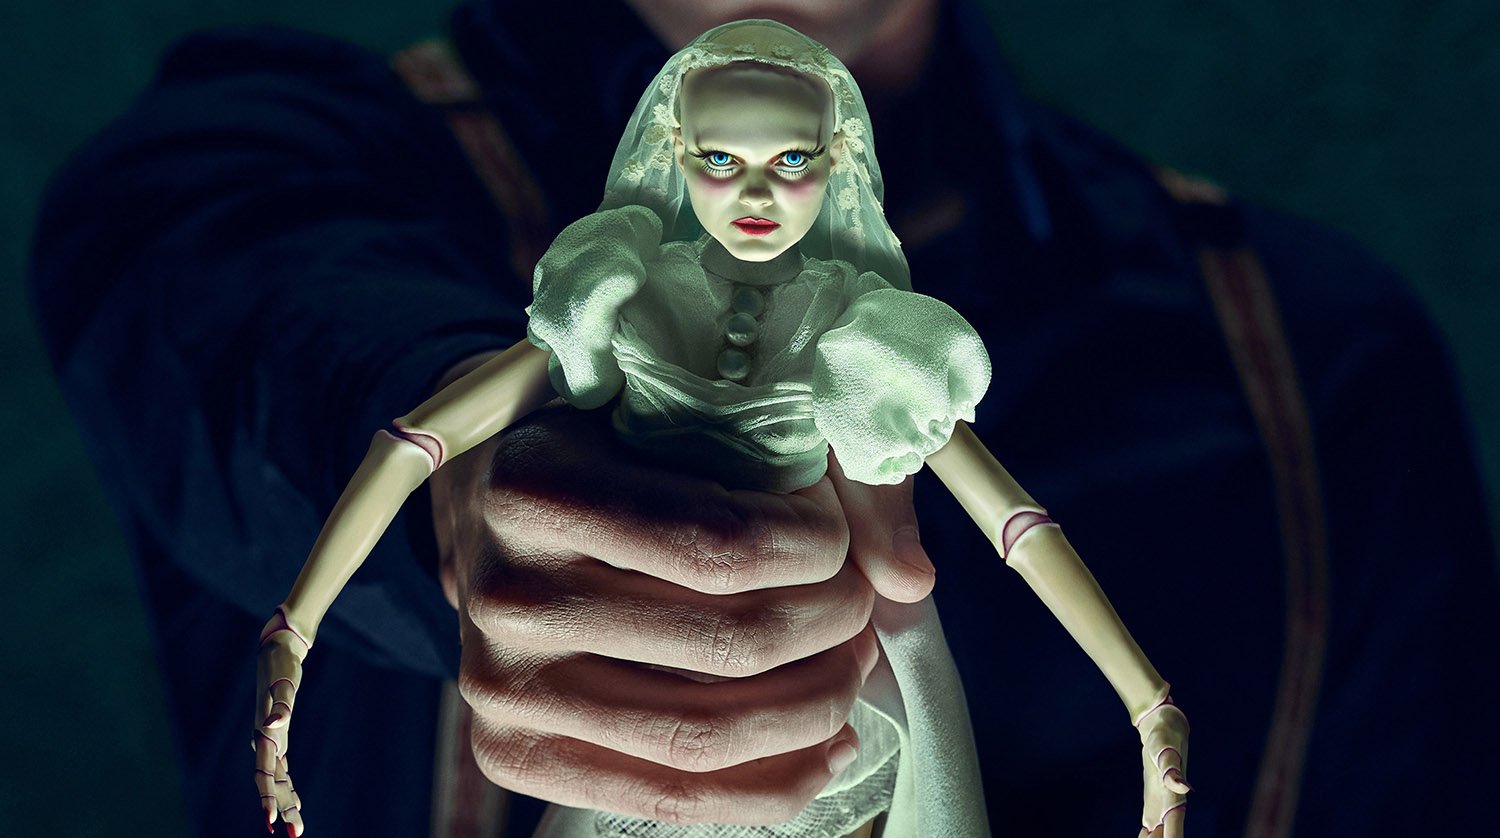 A man holds a doll in a wedding dress in key art for American Horror Stories Season 2, which has a star-studded cast.